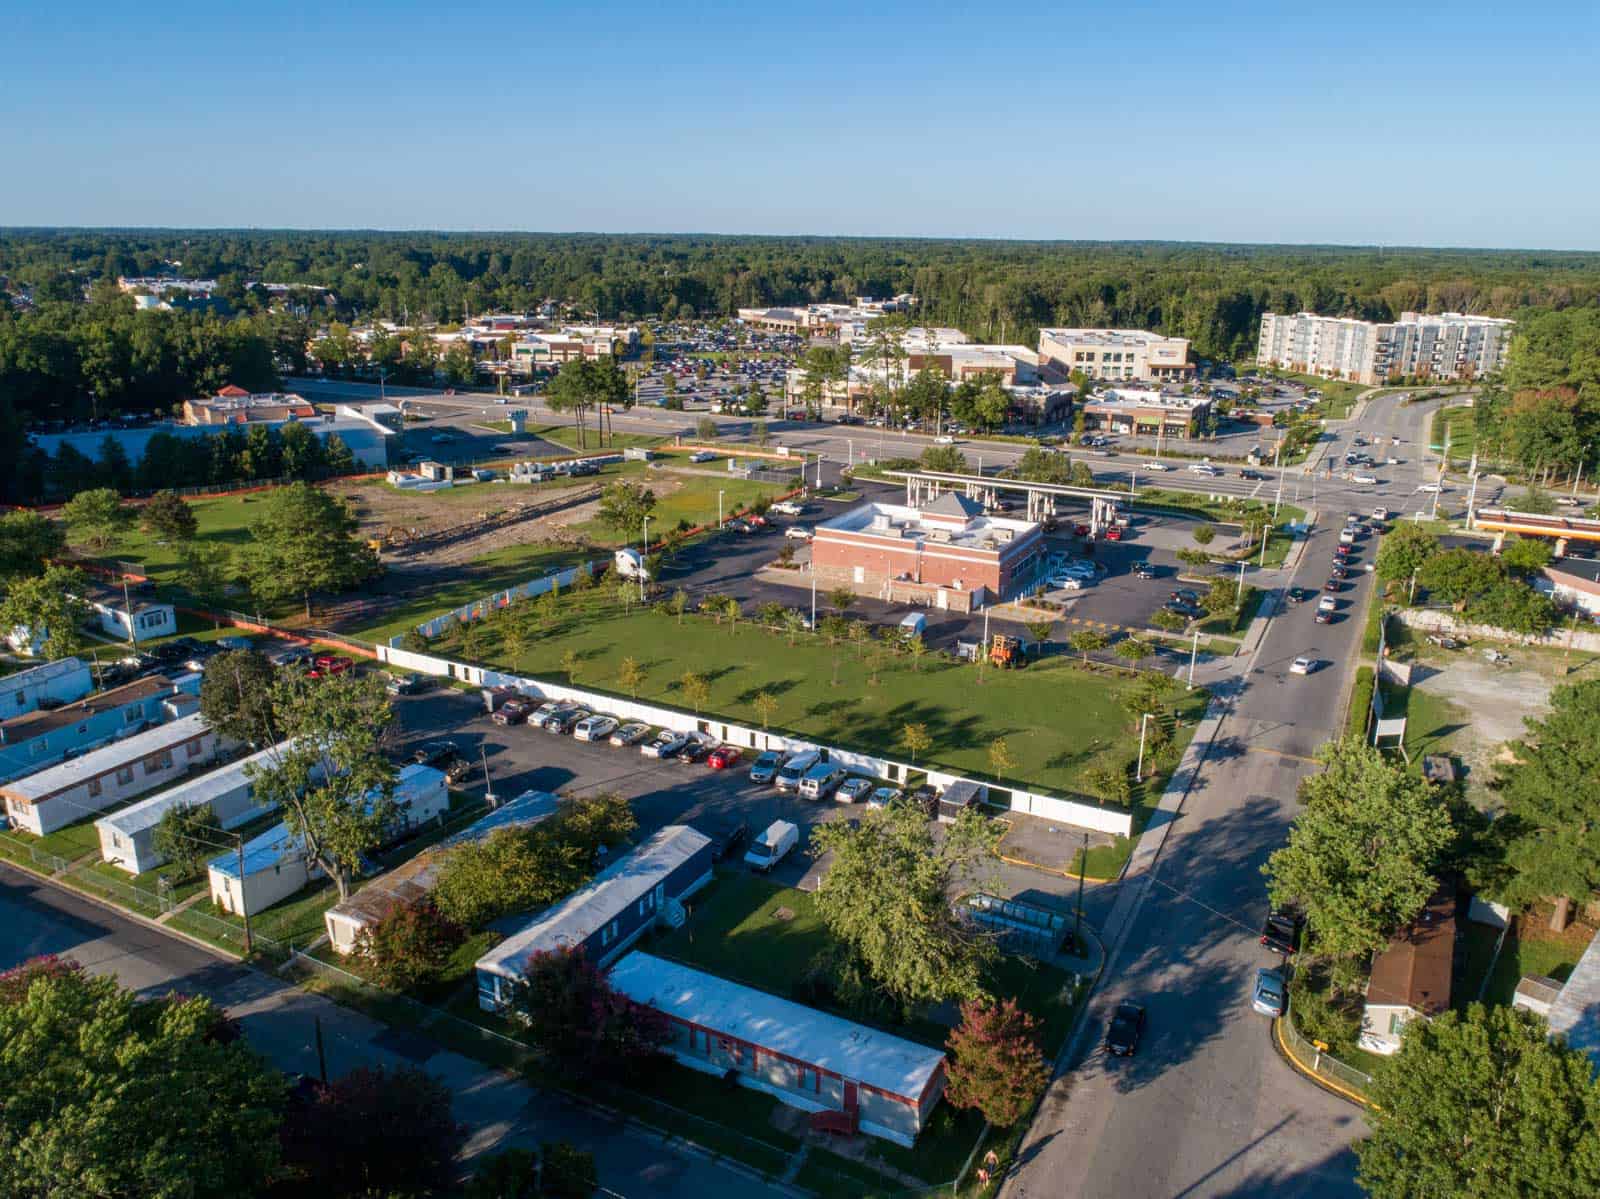 aerial drone photo of commercial real estate property taken above mobile homes in Newport News, VA